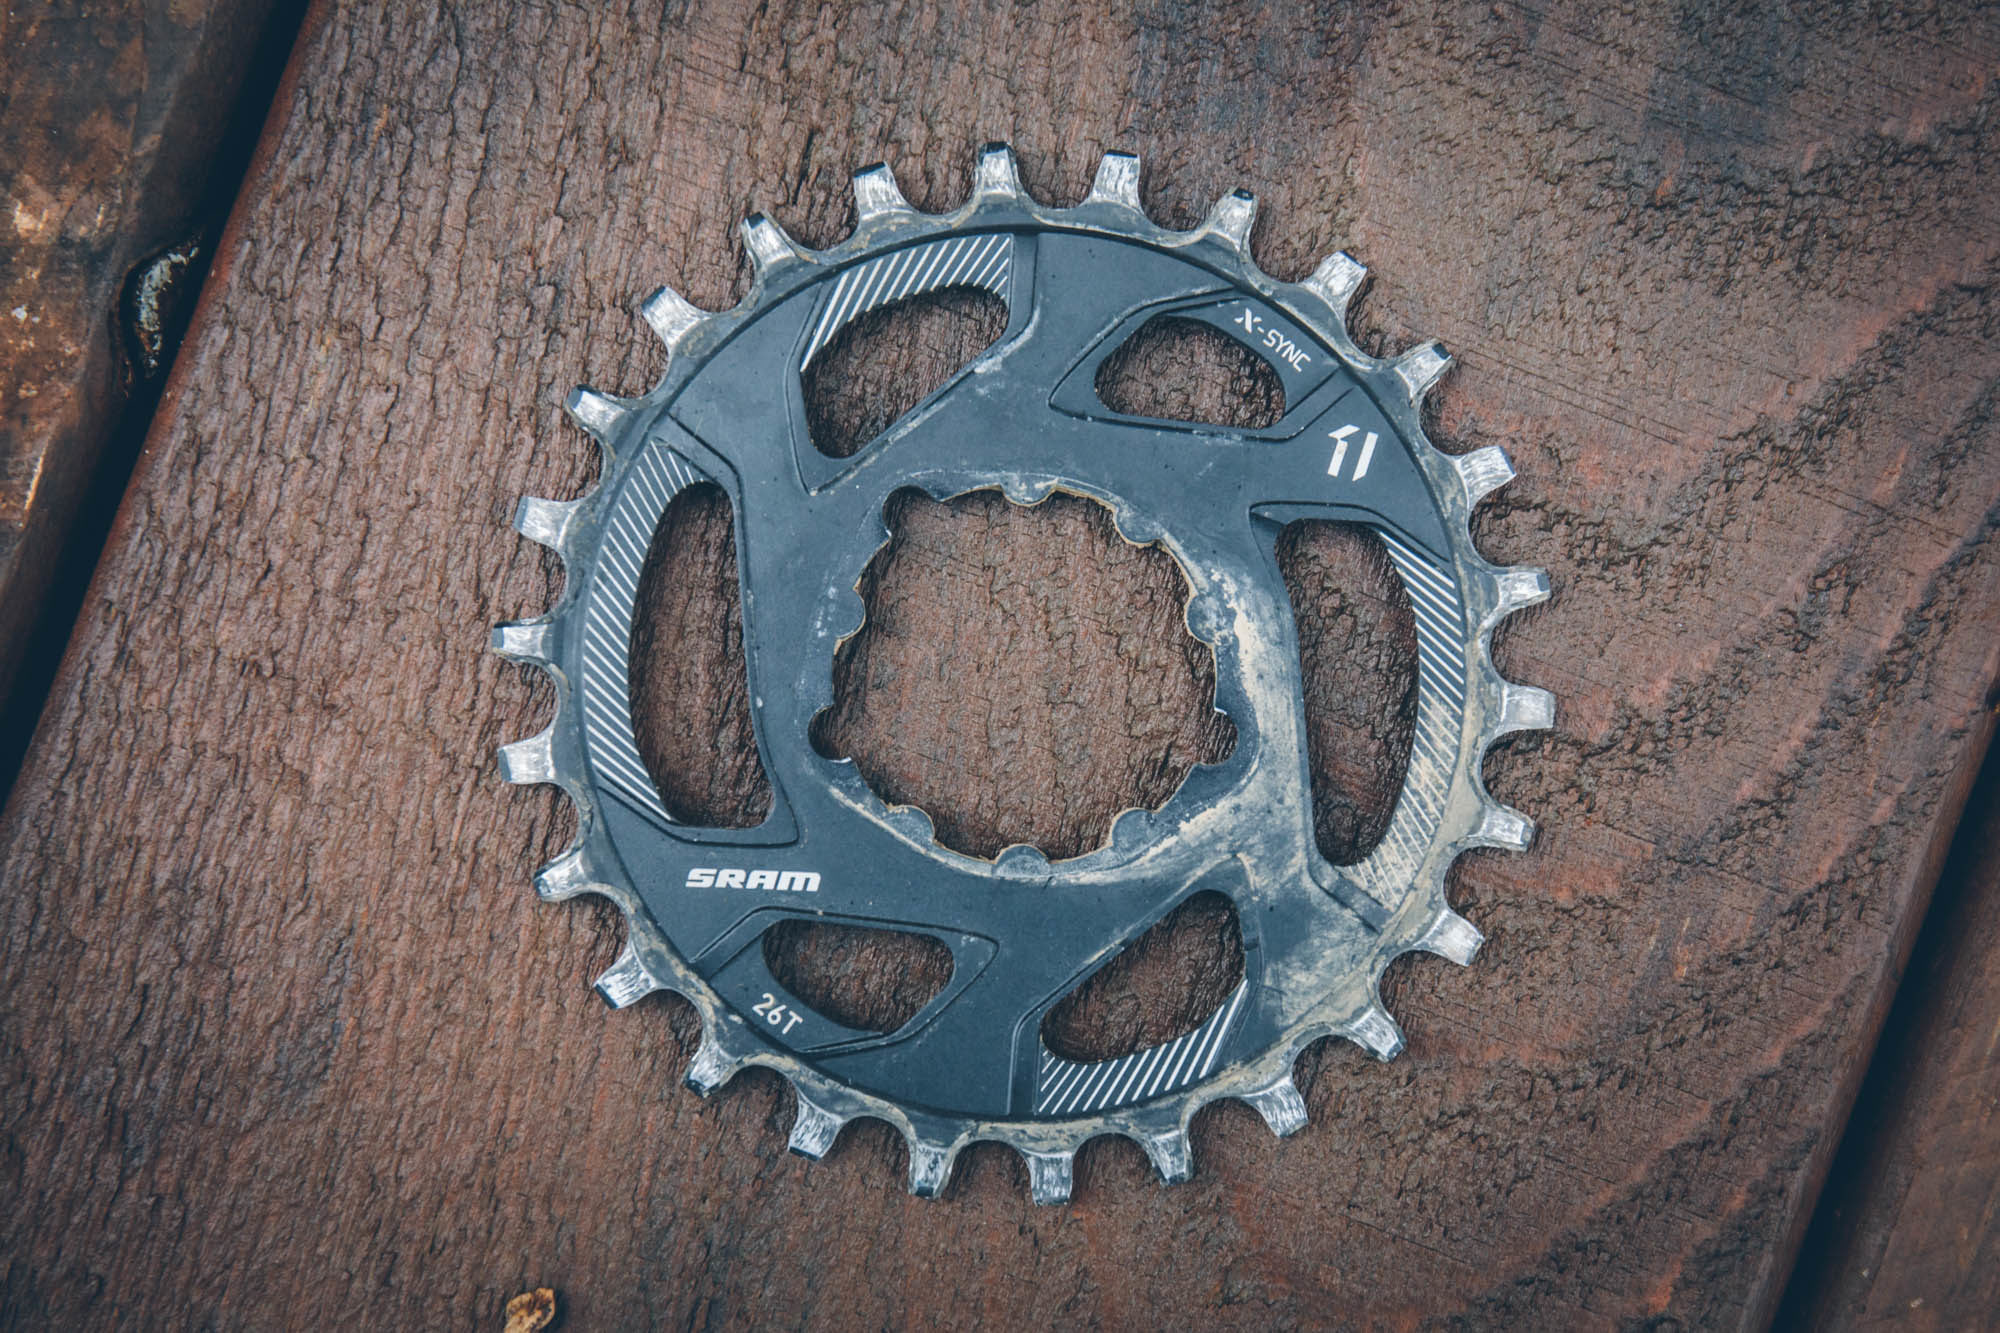 26T chainring for bikepacking